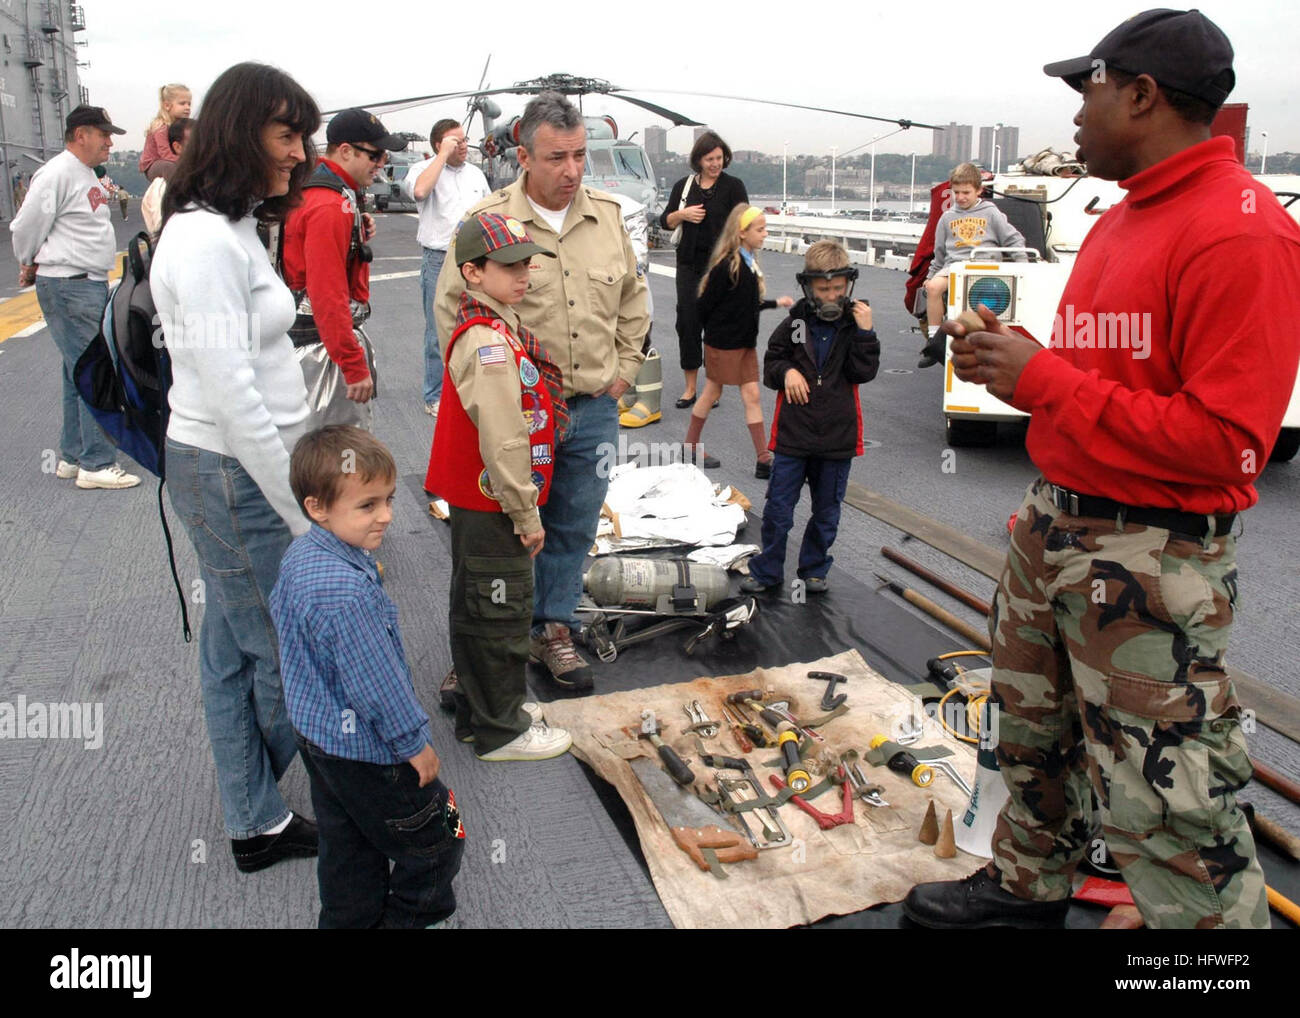 081013-N-6439C-038 NEW YORK (Oct. 13, 2008) Aviation Boatswain's Mate (Handling) 3rd Class Mazi Nickelson talks with New York residents during a tour of the amphibious assault ship USS Nassau (LHA 4). Nassau is in New York to celebrate the 100th anniversary of the Great White Fleet. Sent out by President Theodore Roosevelt in 1907, 16 battleships circumnavigated the globe on a goodwill mission and display of American naval power. (U.S. Navy photo by Mass Communication Specialist 2nd Class Amanda Clayton/Released) US Navy 081013-N-6439C-038 Aviation Boatswain's Mate (Handling) 3rd Class Mazi Ni Stock Photo